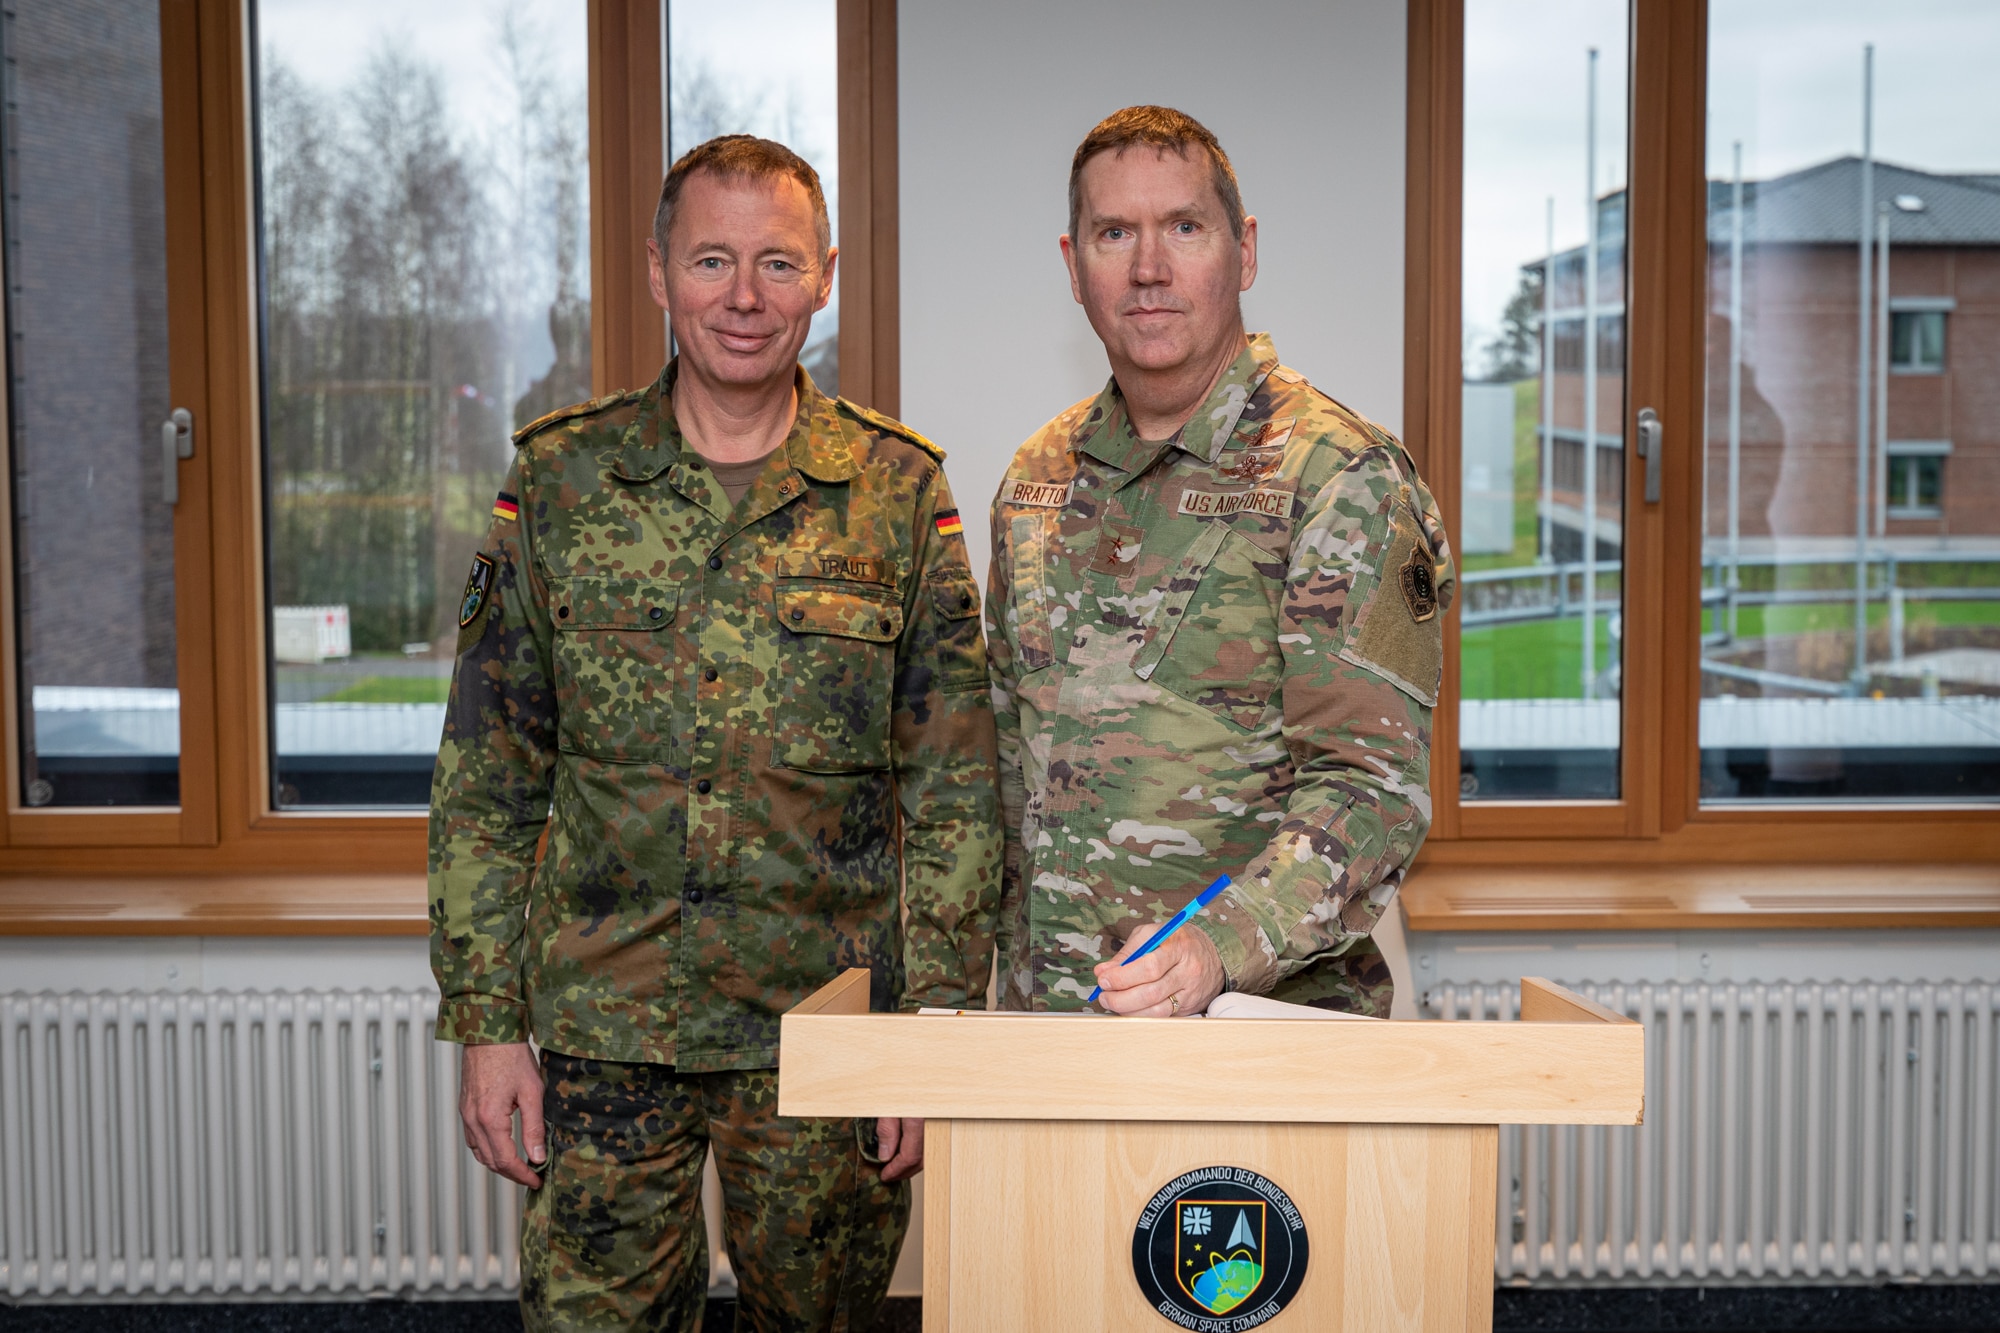 Maj. Gen. Shawn Bratton, commander of Space Training and Readiness Command, right, poses for a photo with German Maj. Gen. Michael Traut, commander of German Space Command, during a visit to the German Space Situational Awareness Centre in Uedem, Germany